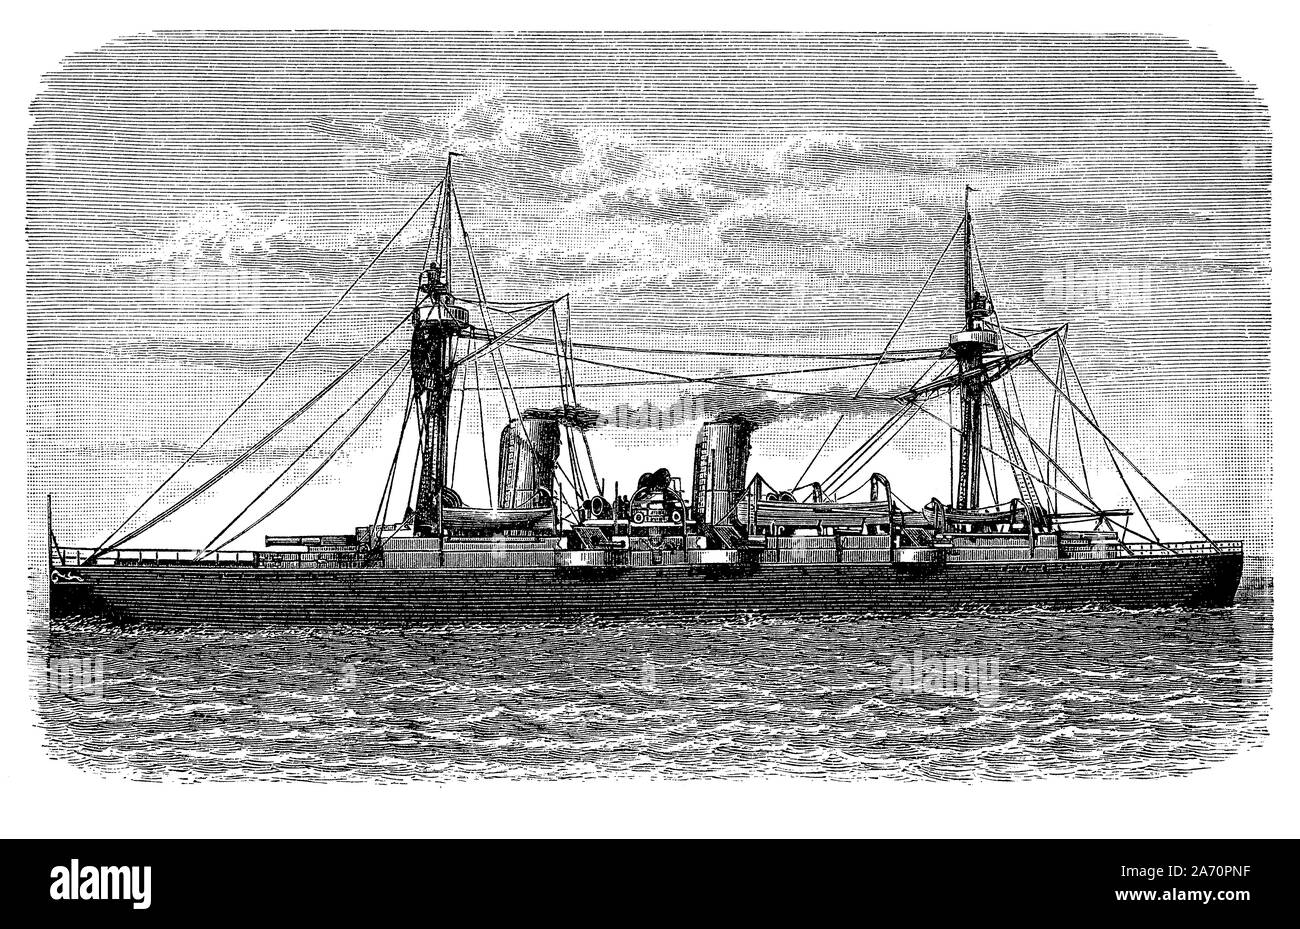 Chilean cruiser Esmeralda launched in 1883 with an armored deck combining heavy artillery, high speed and low displacement for cruiser missions of fast patrol Stock Photo